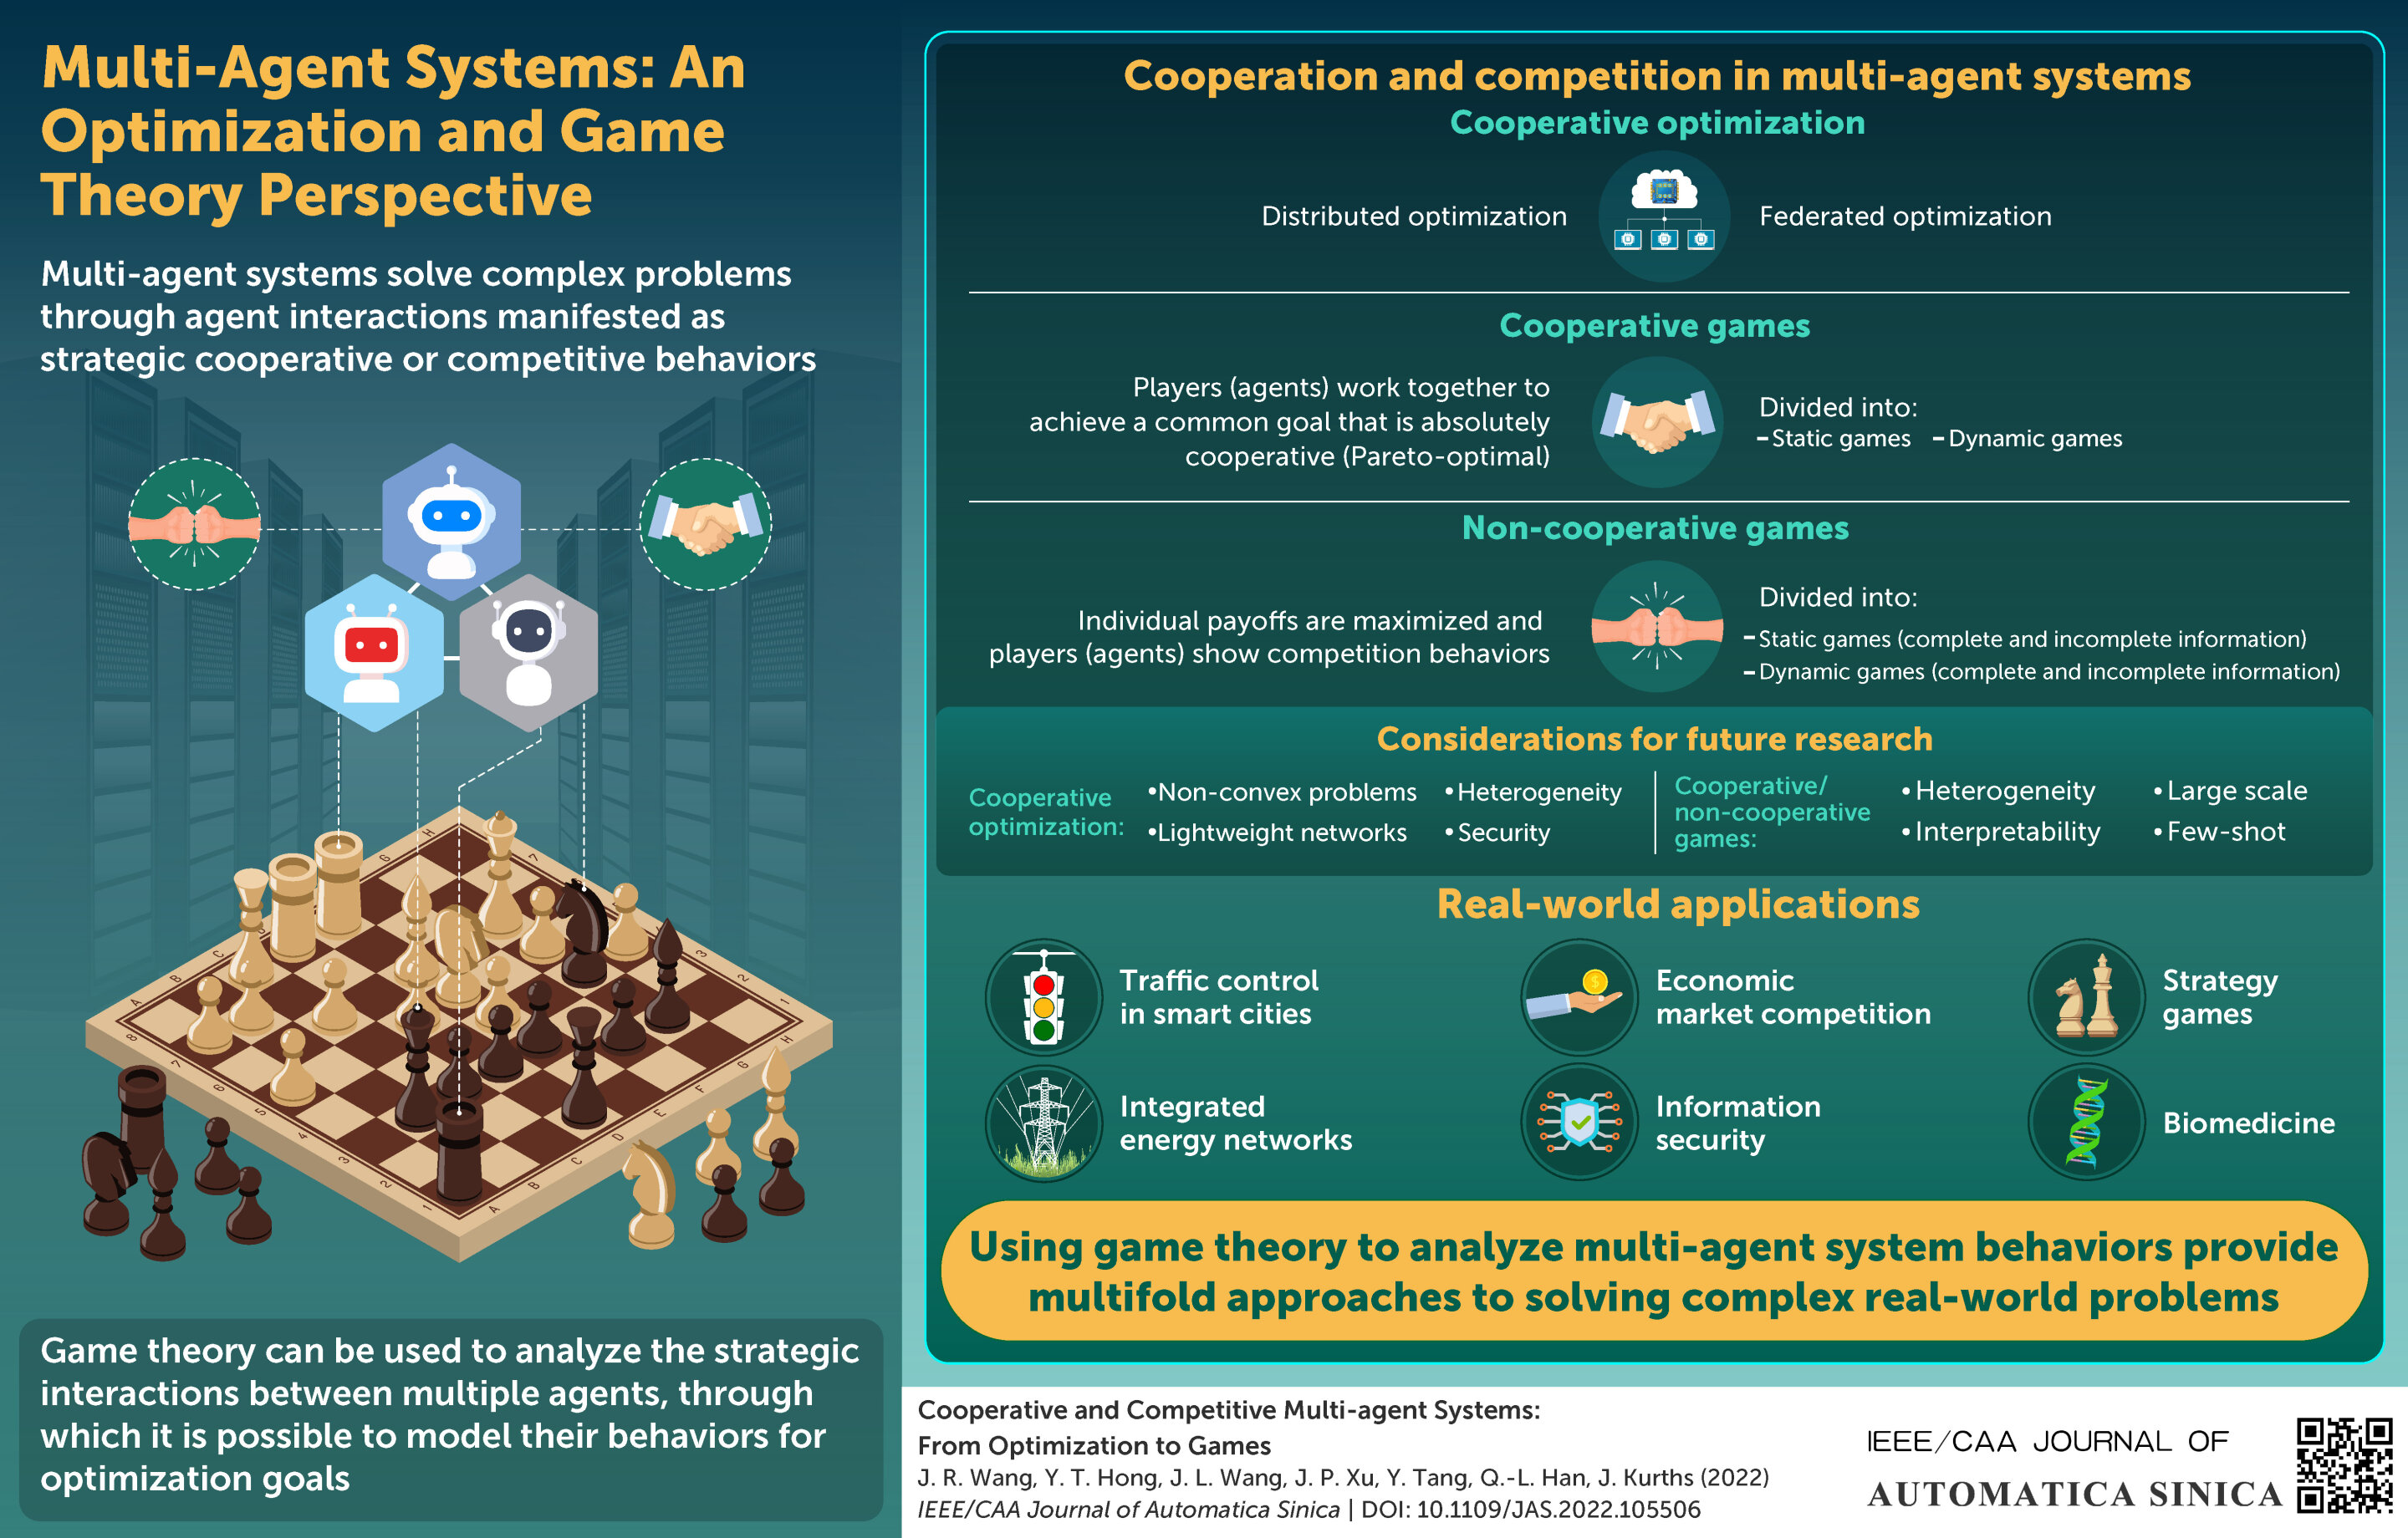 #New study describes multi-agent systems for optimization and decision-making through games